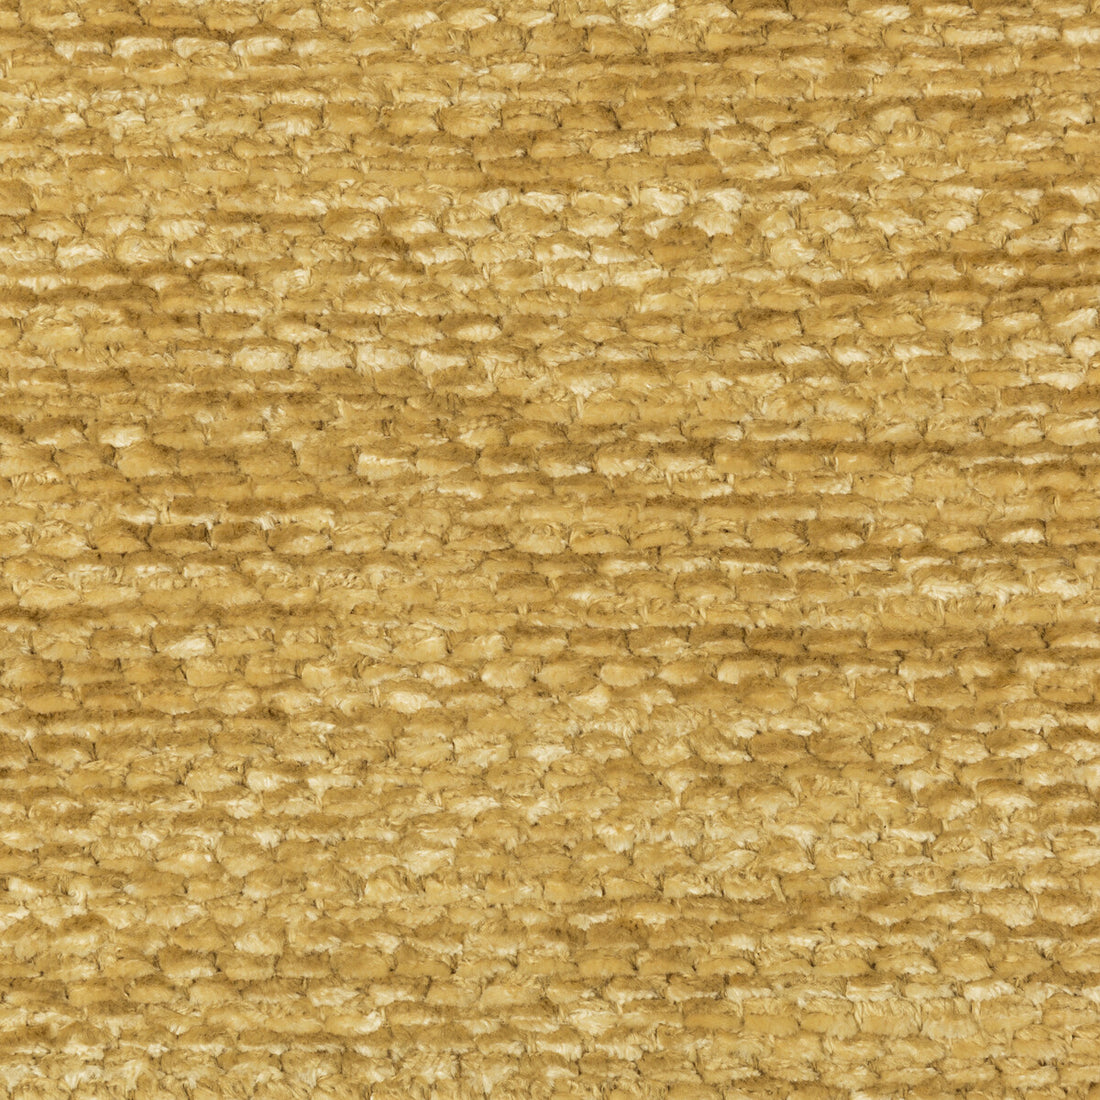 Chamoux Texture fabric in honey color - pattern 8019145.16.0 - by Brunschwig &amp; Fils in the Chambery Textures II collection